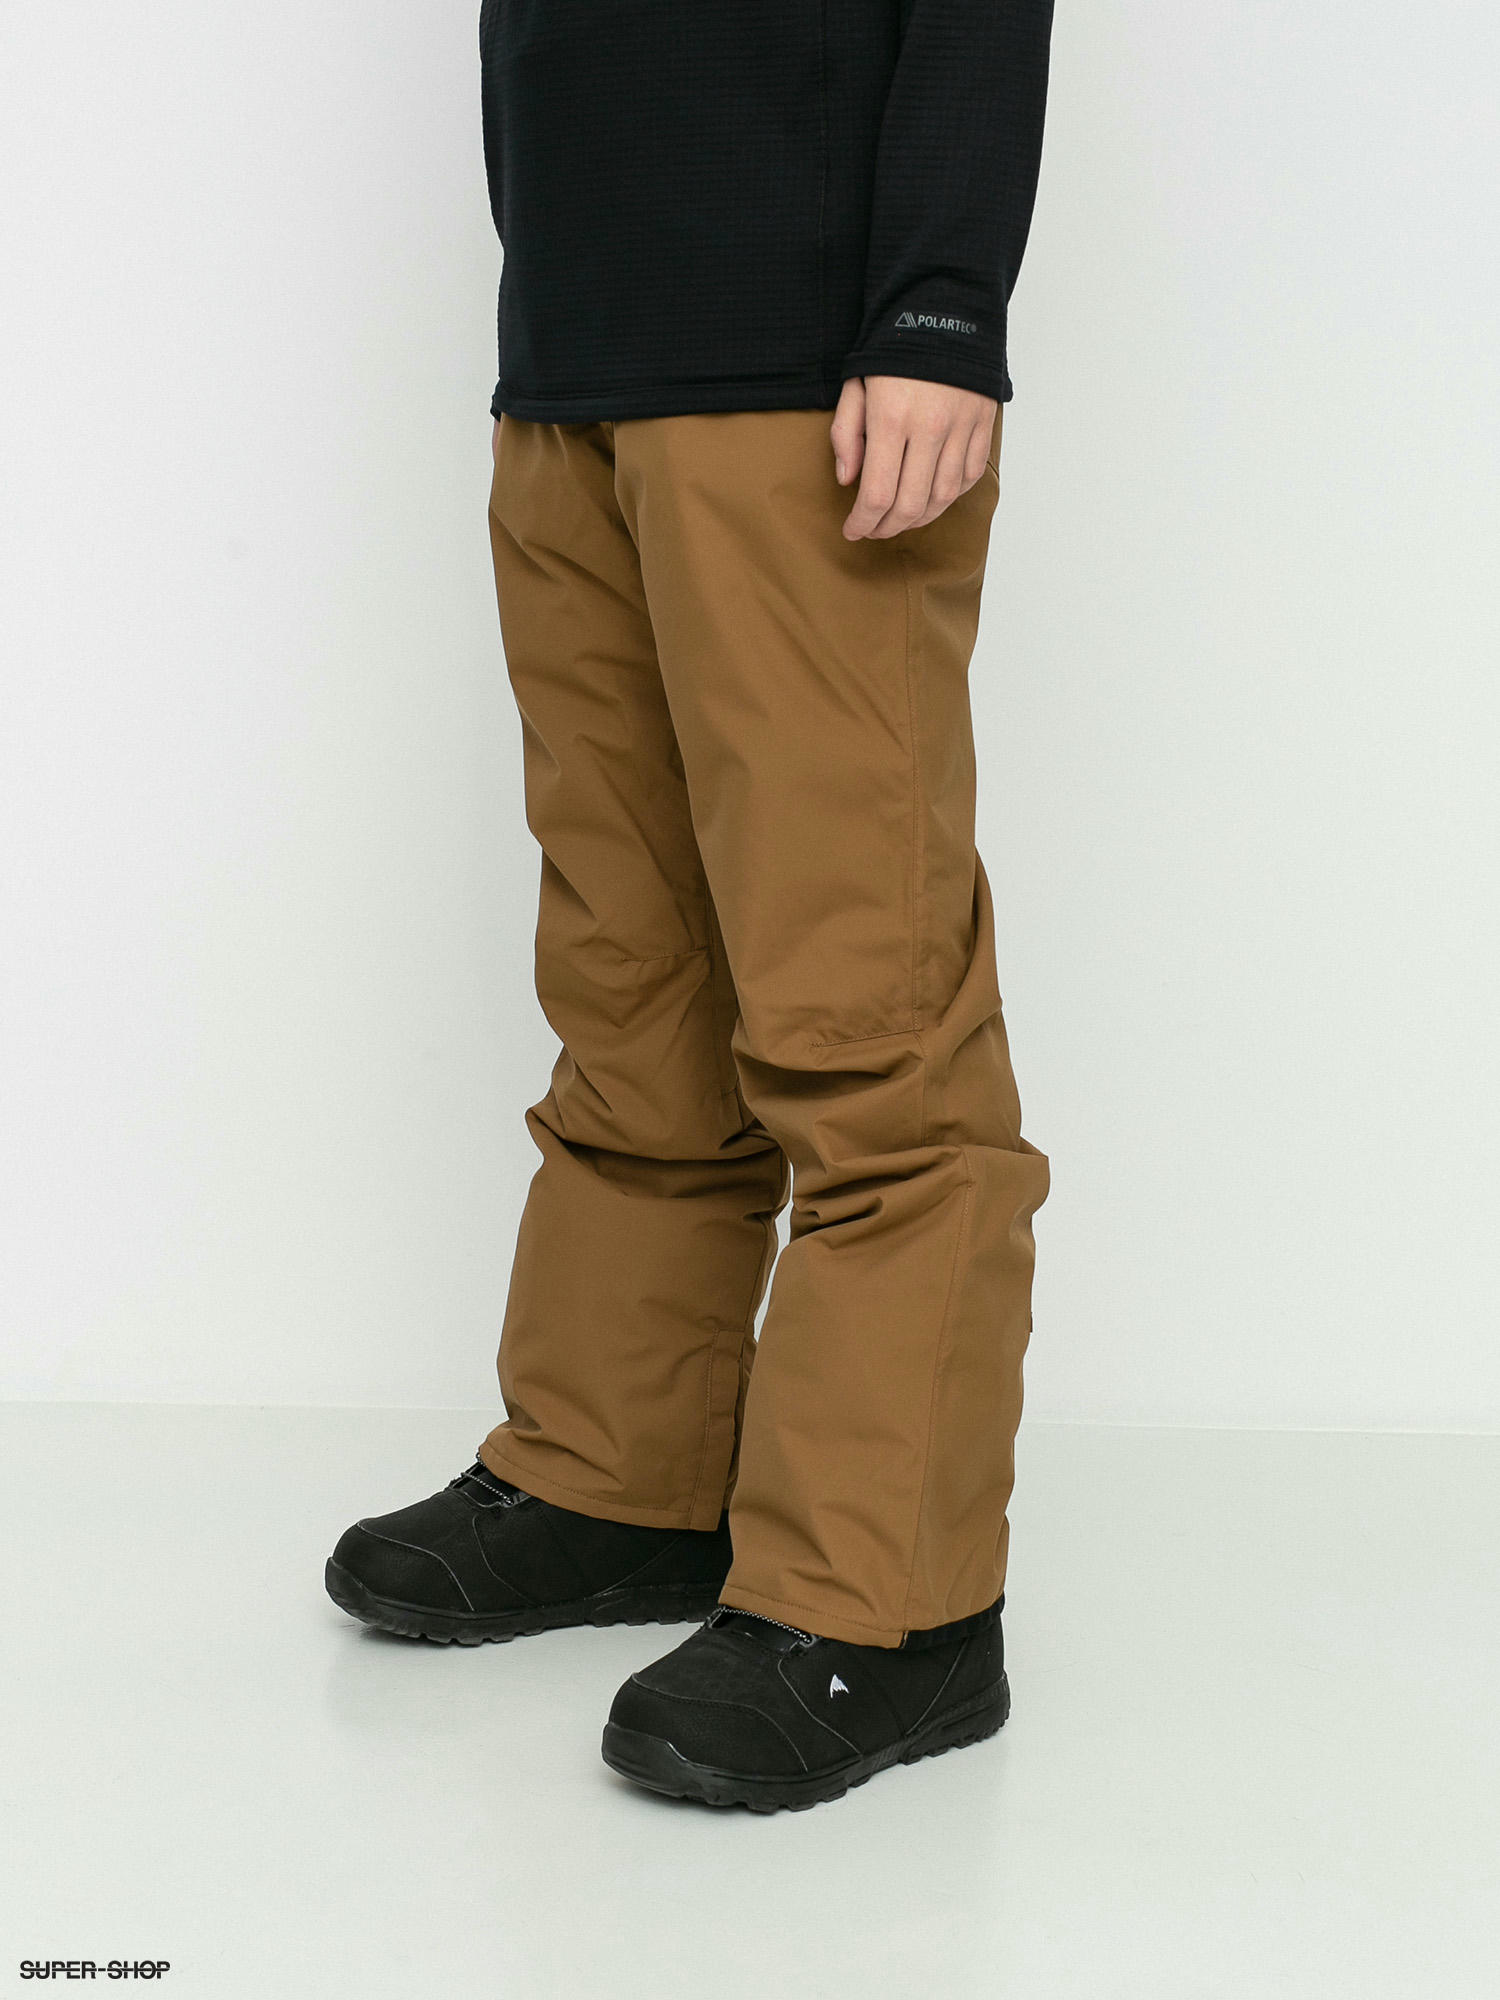 Details about   Billabong Outsider Mens Pants Snowboard Olive All Sizes 